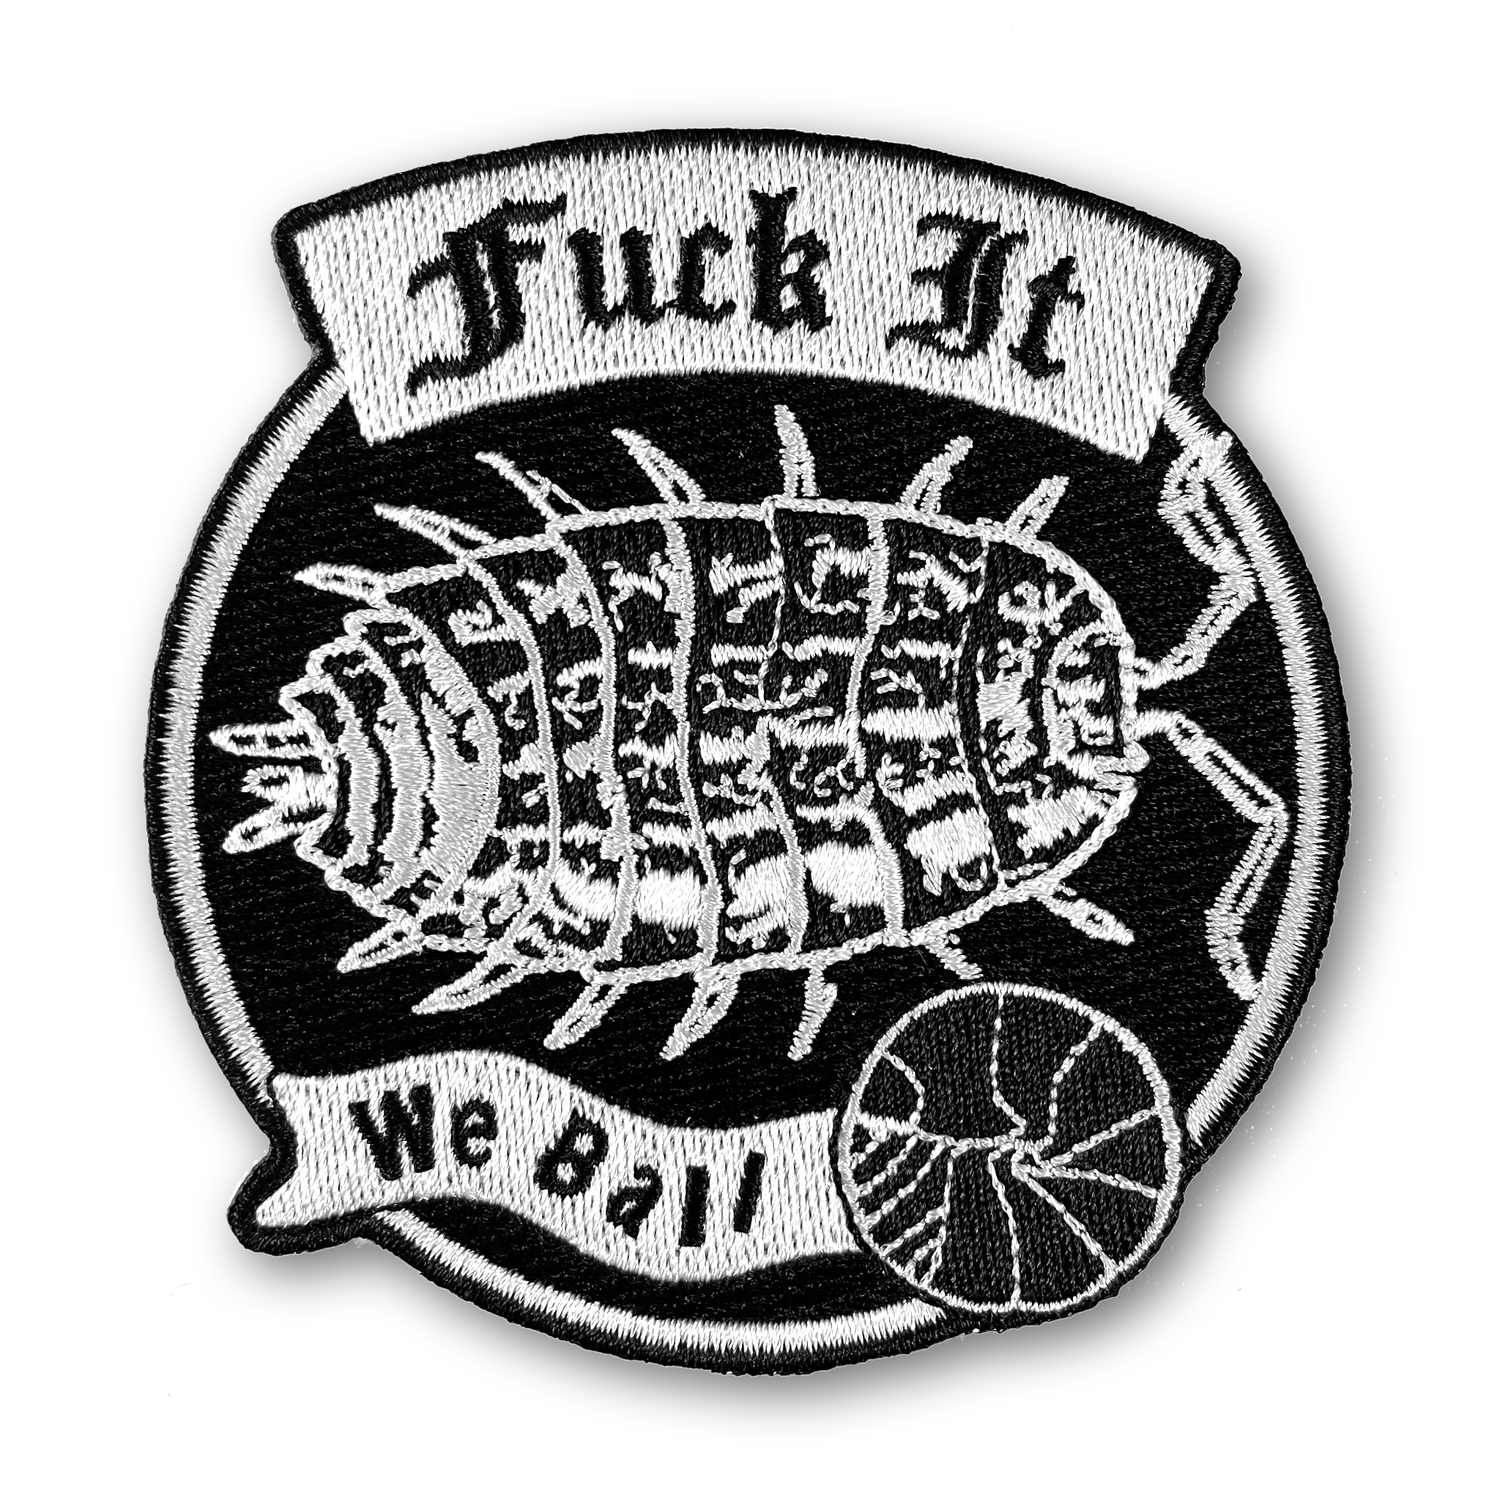 Pins & Patches